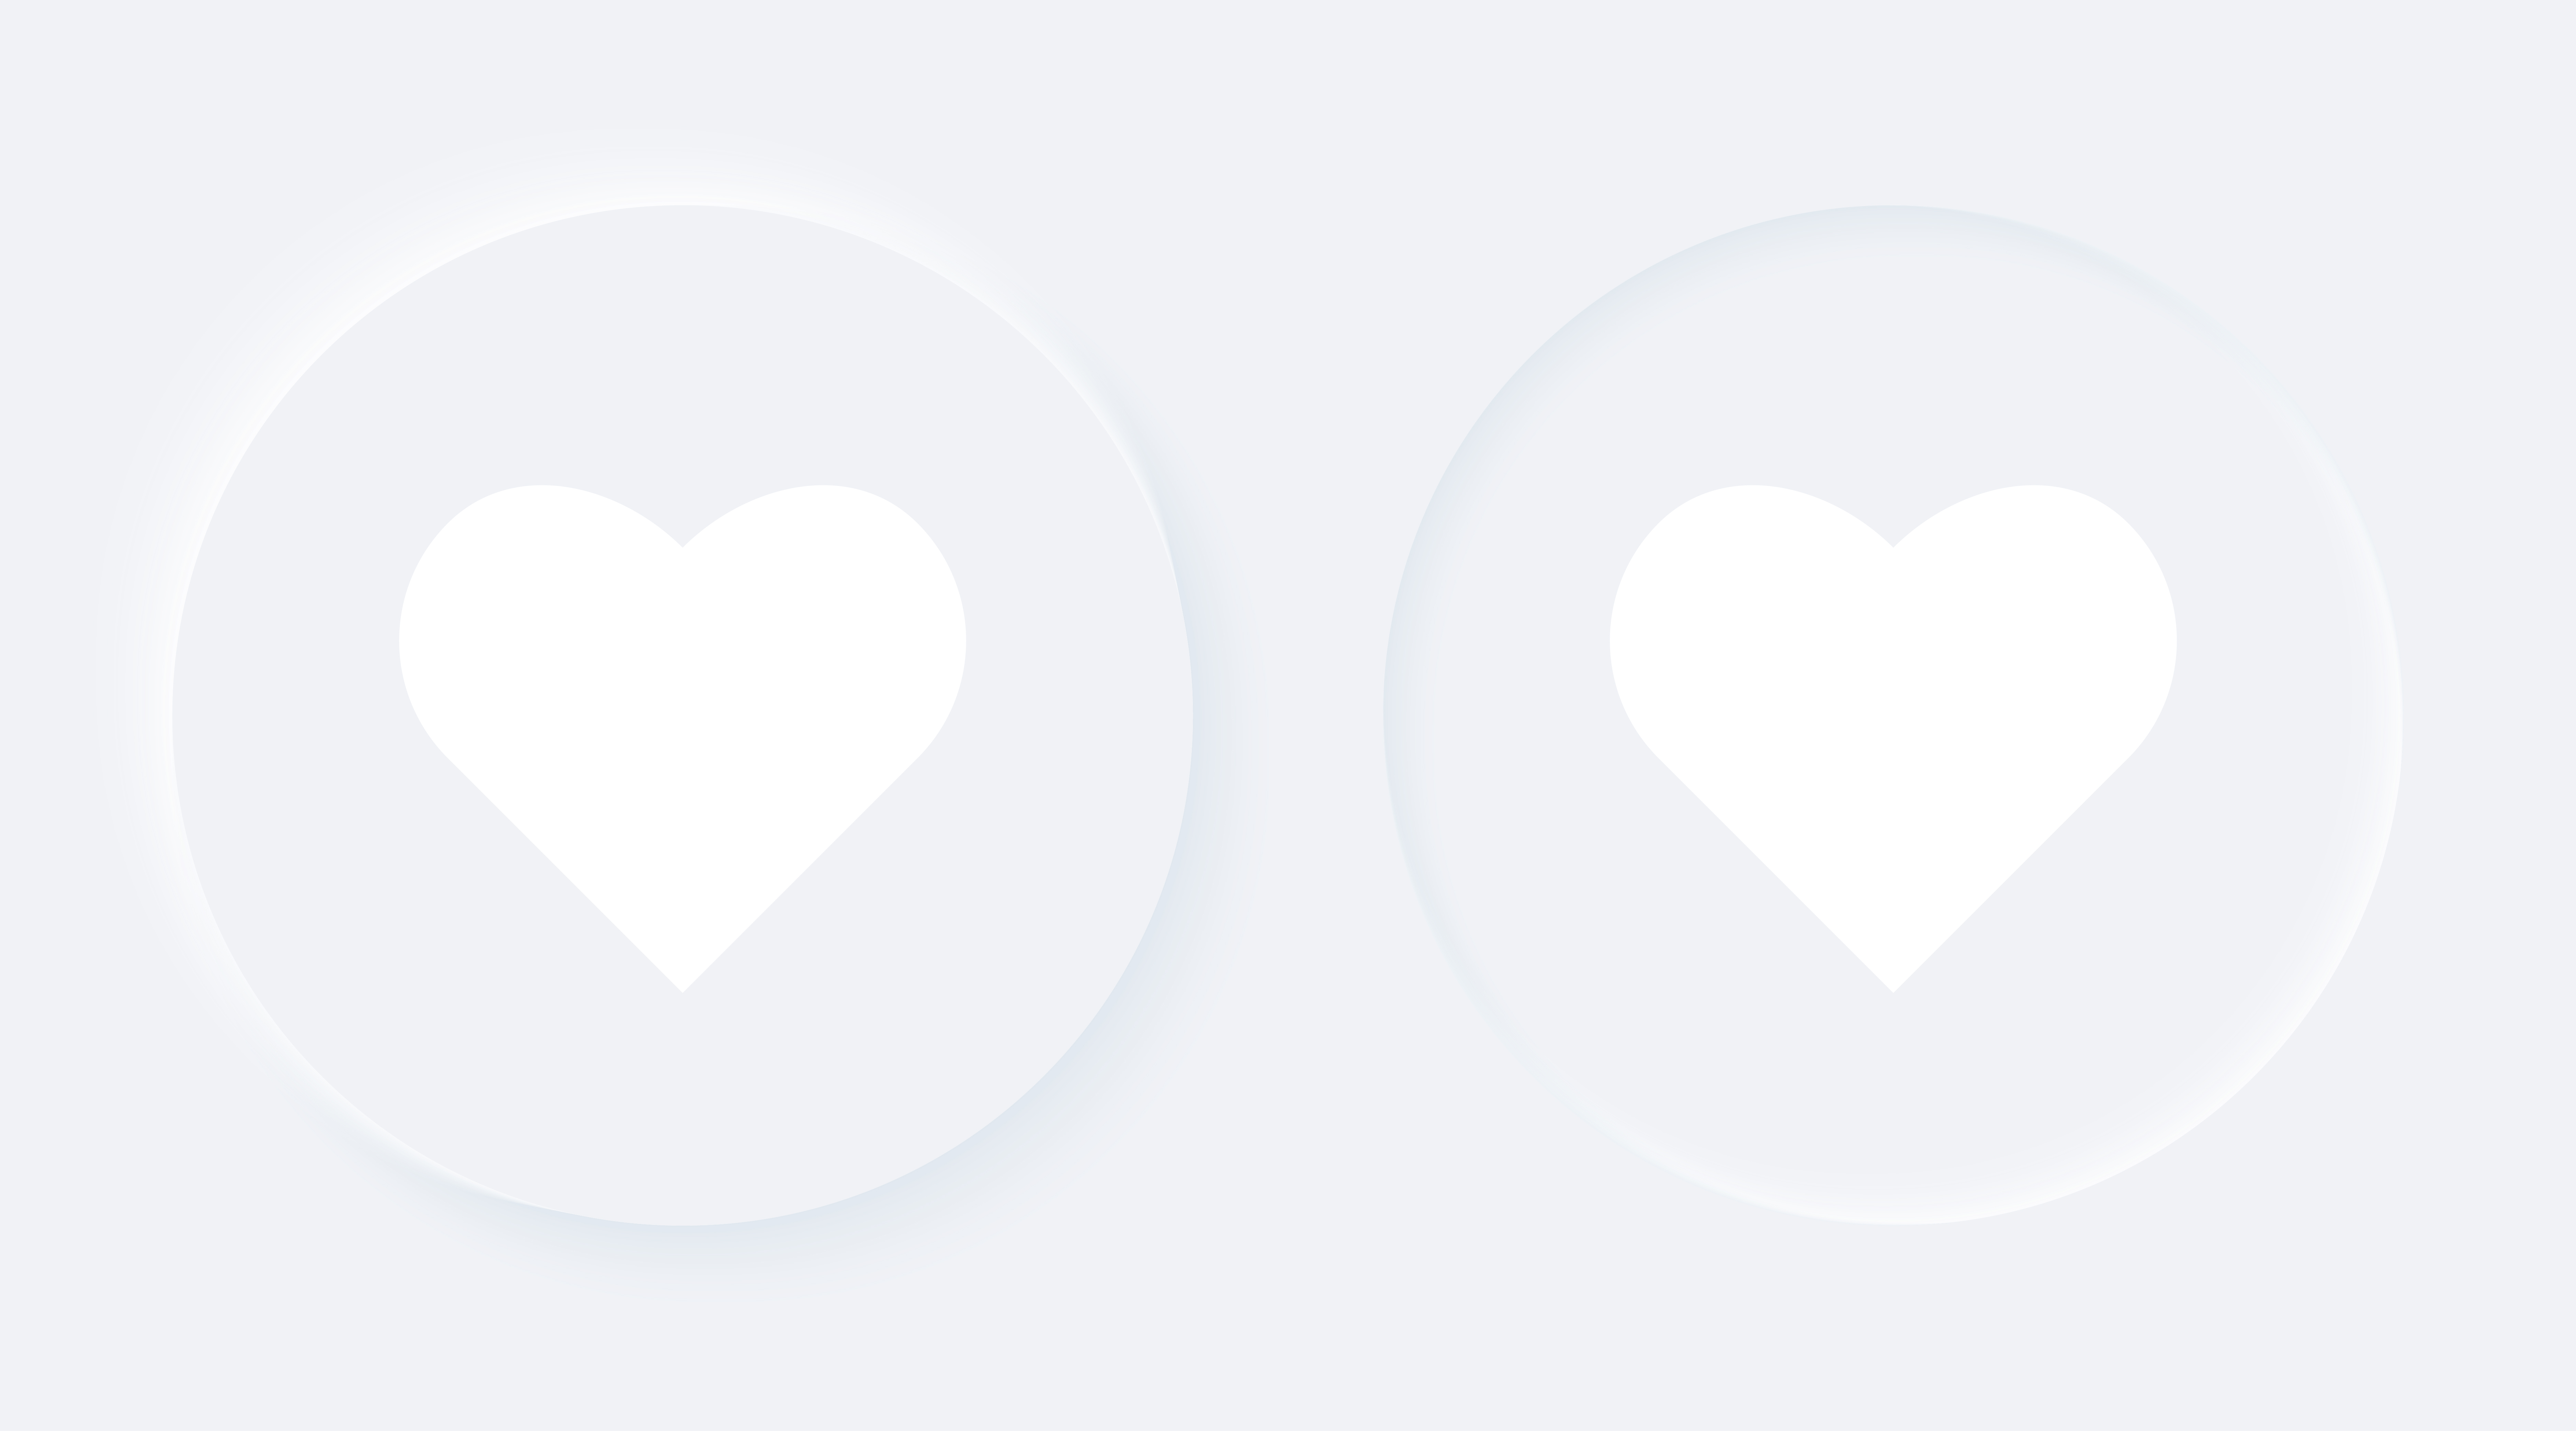 Bright white gradient buttons with heart shapes. Internet symbol like on a background. Neumorphic effect icon. Shaped love figure in trendy soft 3D style. Circle ellipse